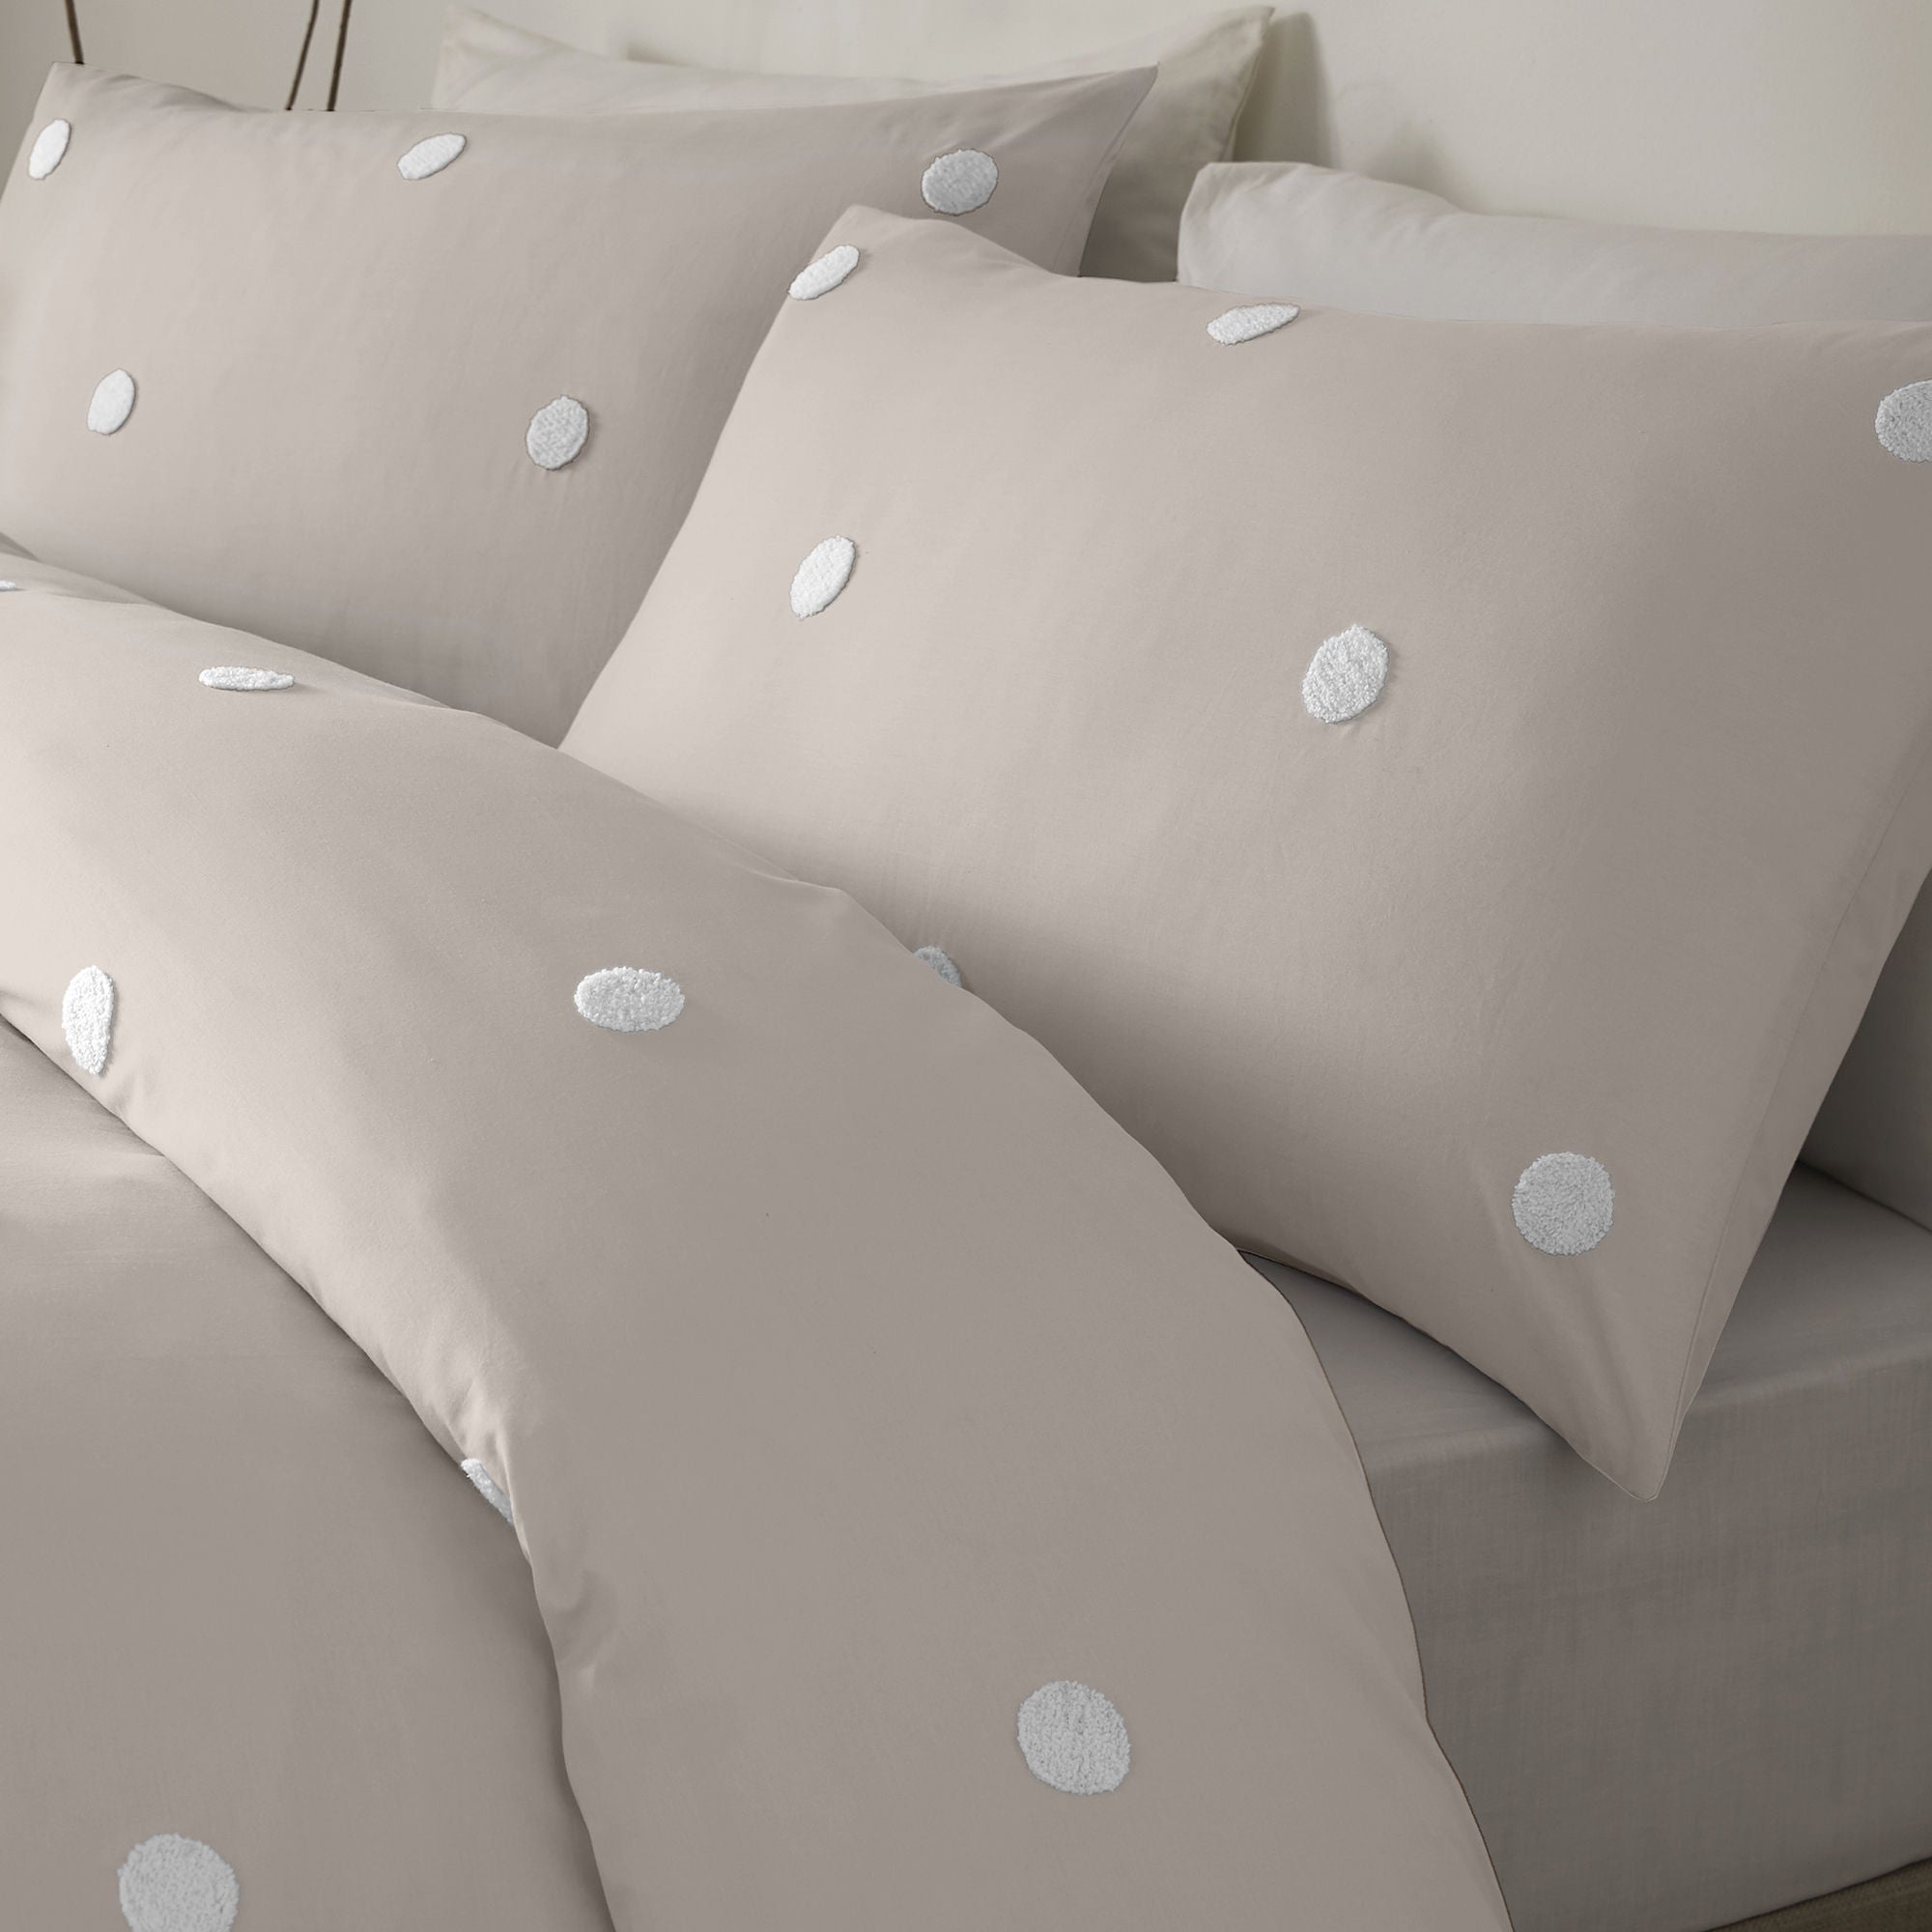 Dot Garden Duvet Cover Set by Appletree Boutique in White with Pink Dots - Duvet Cover Set - Appletree Boutique